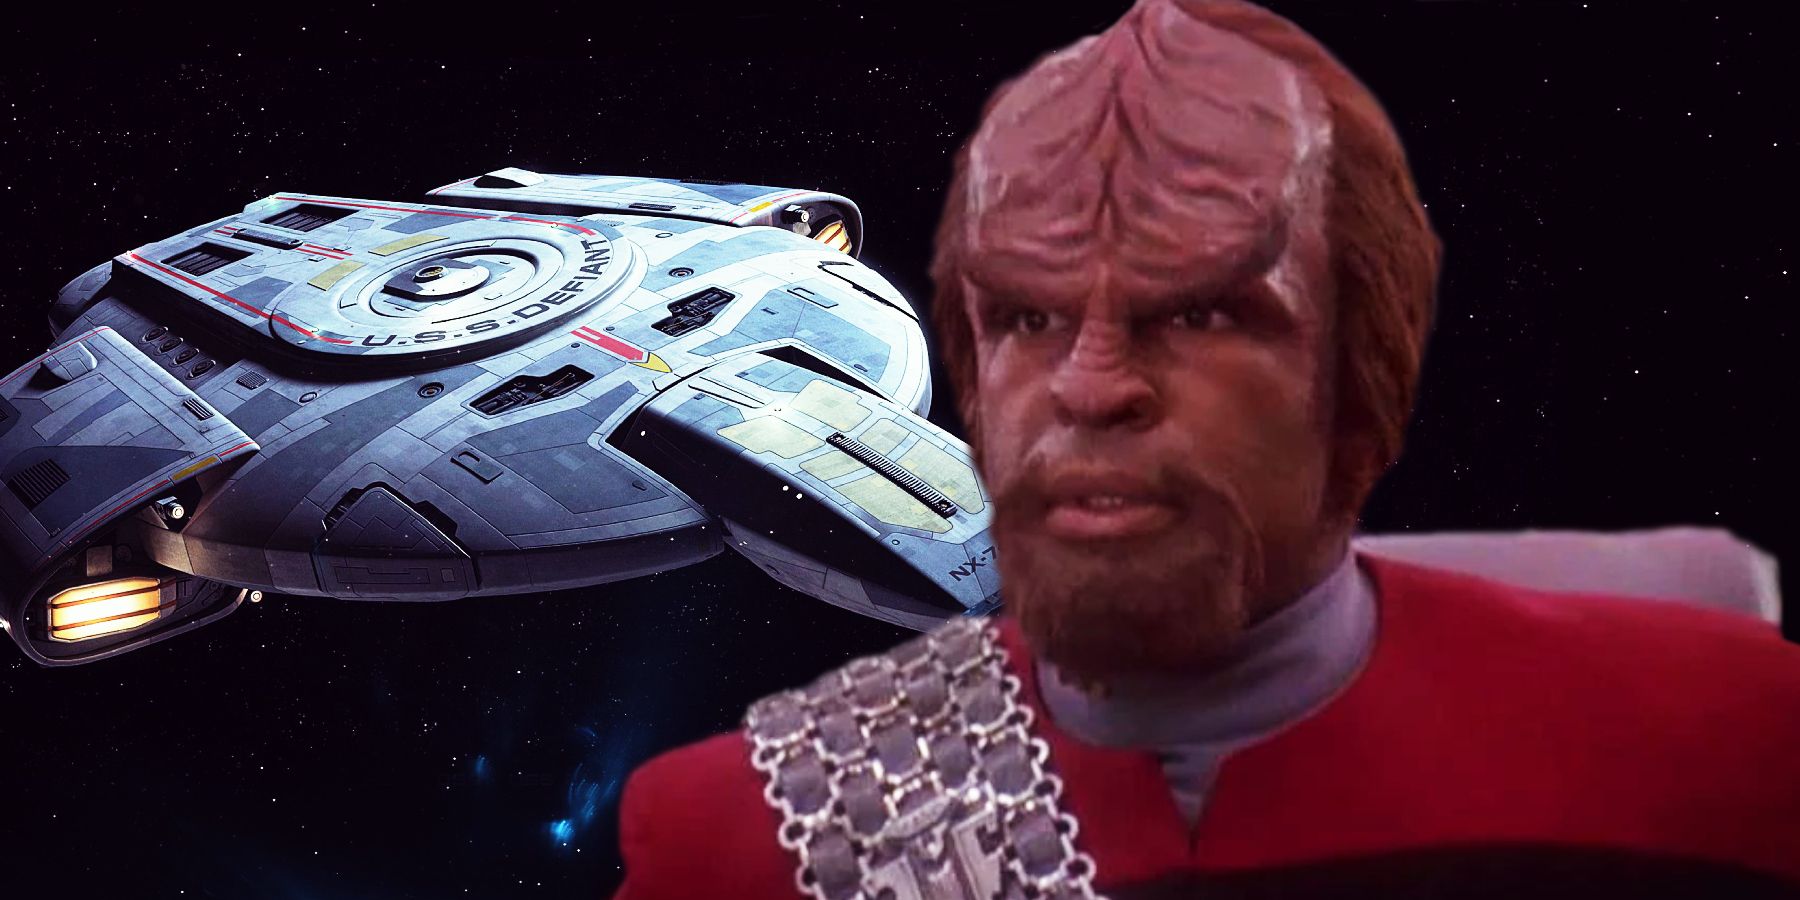 Collage of Commander Worf in Star Trek: Deep Space Nine and the Defiant